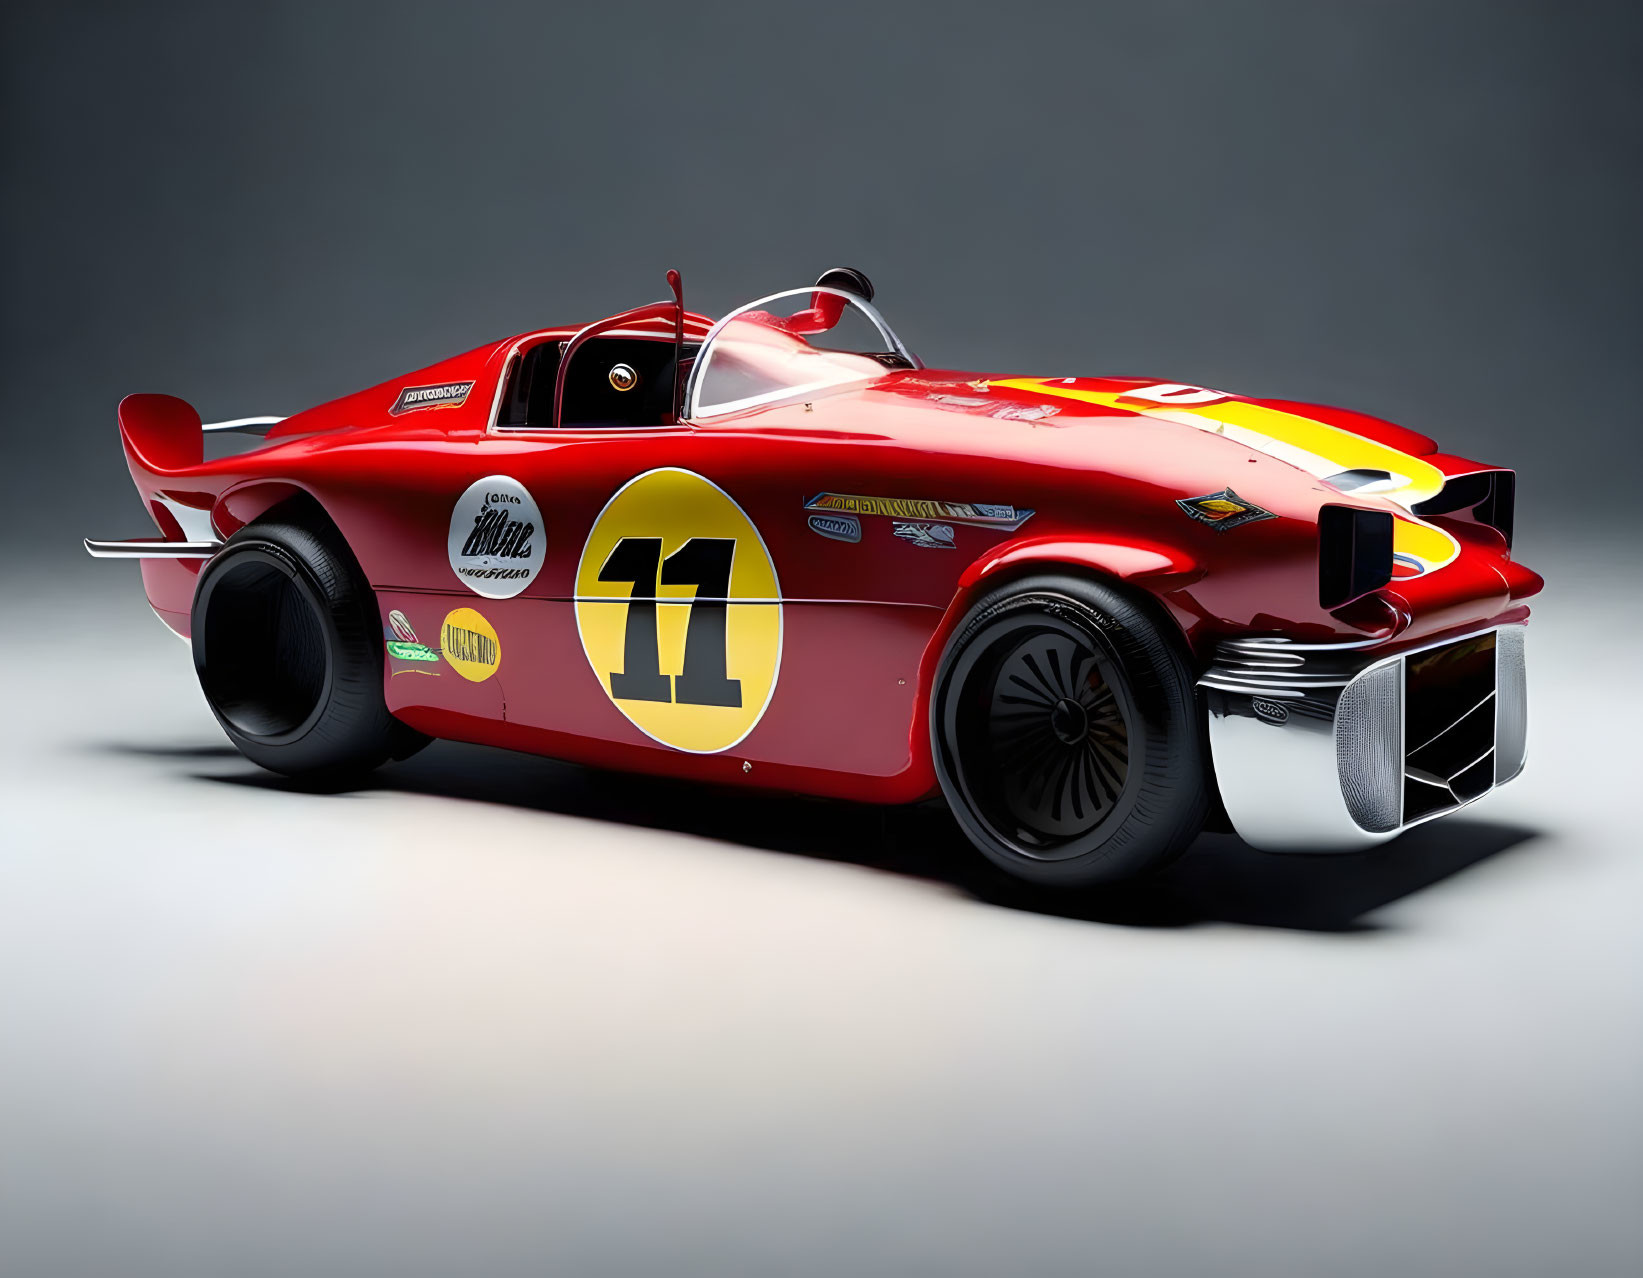 Vintage Red Race Car with Number 11 and Sponsor Decals